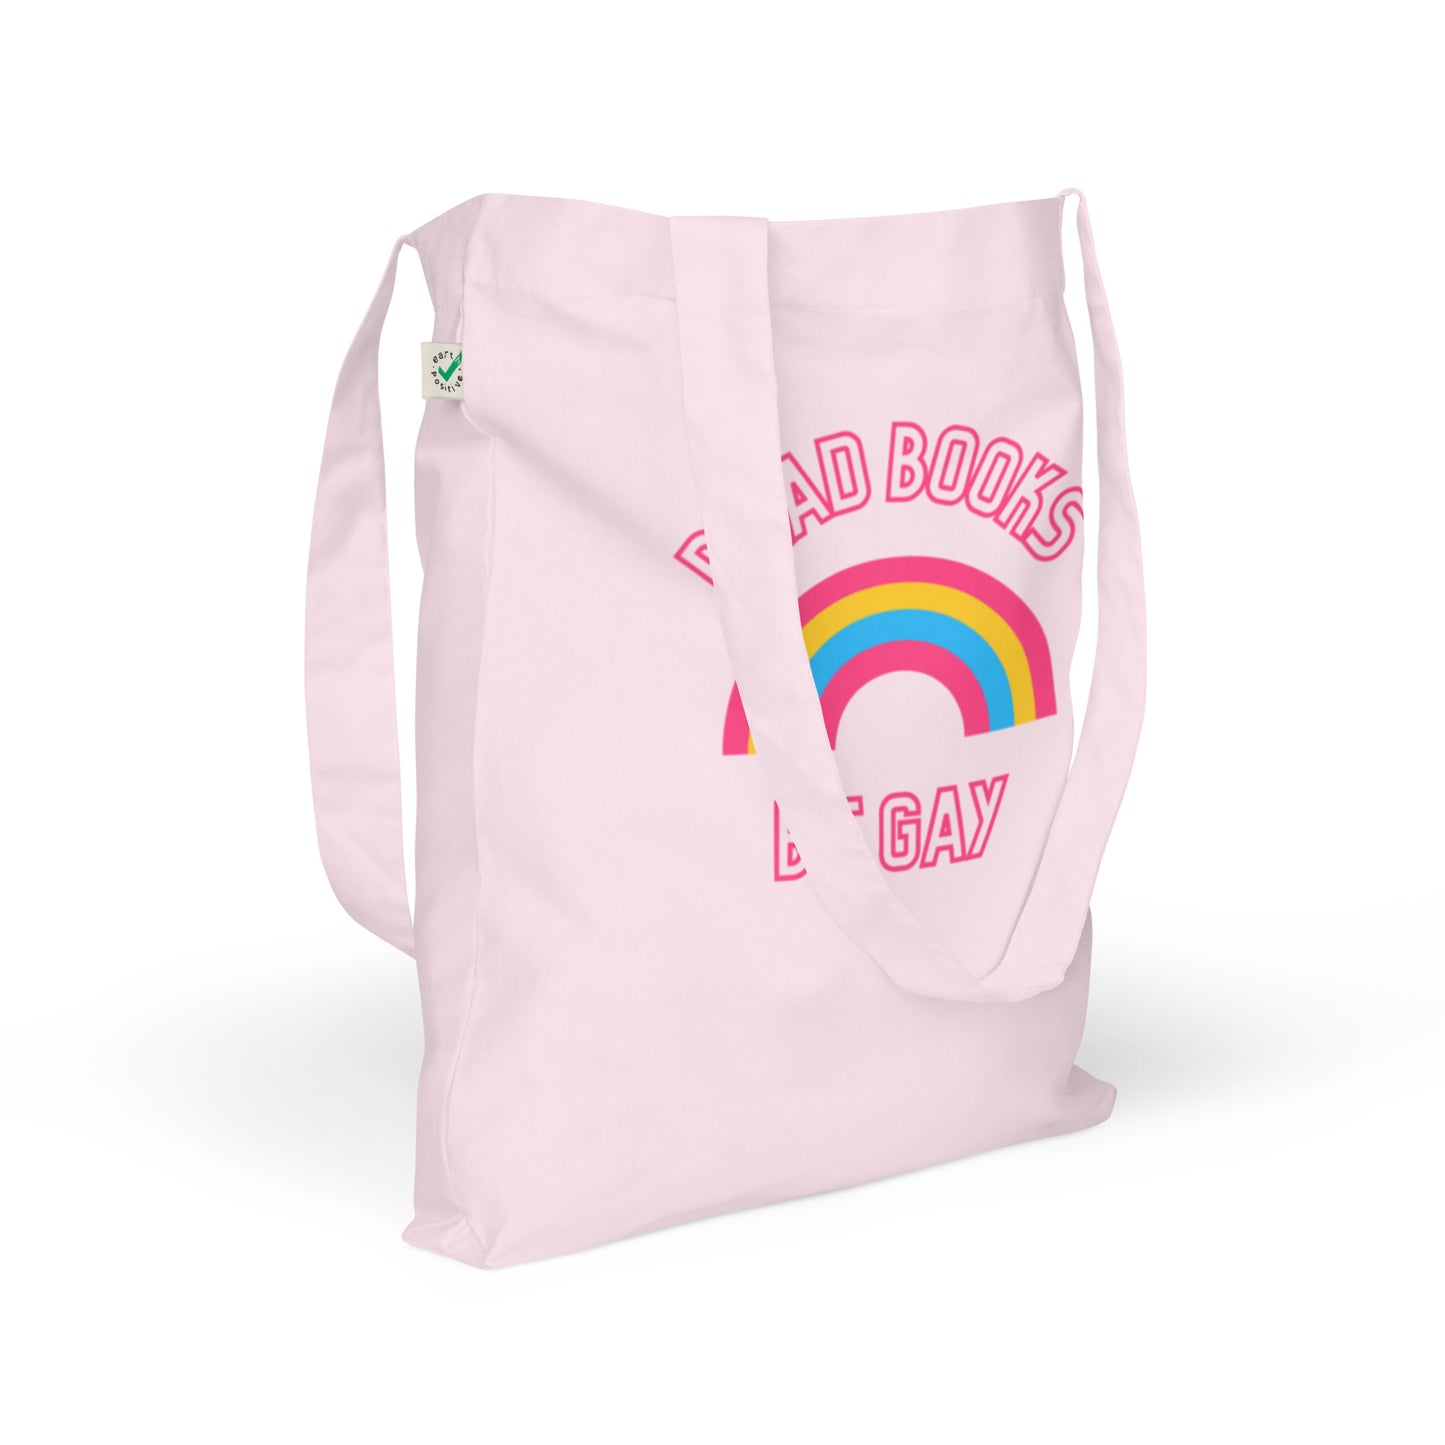 Read Books Be Gay (Pansexual Colors) Organic Fashion Tote Bag